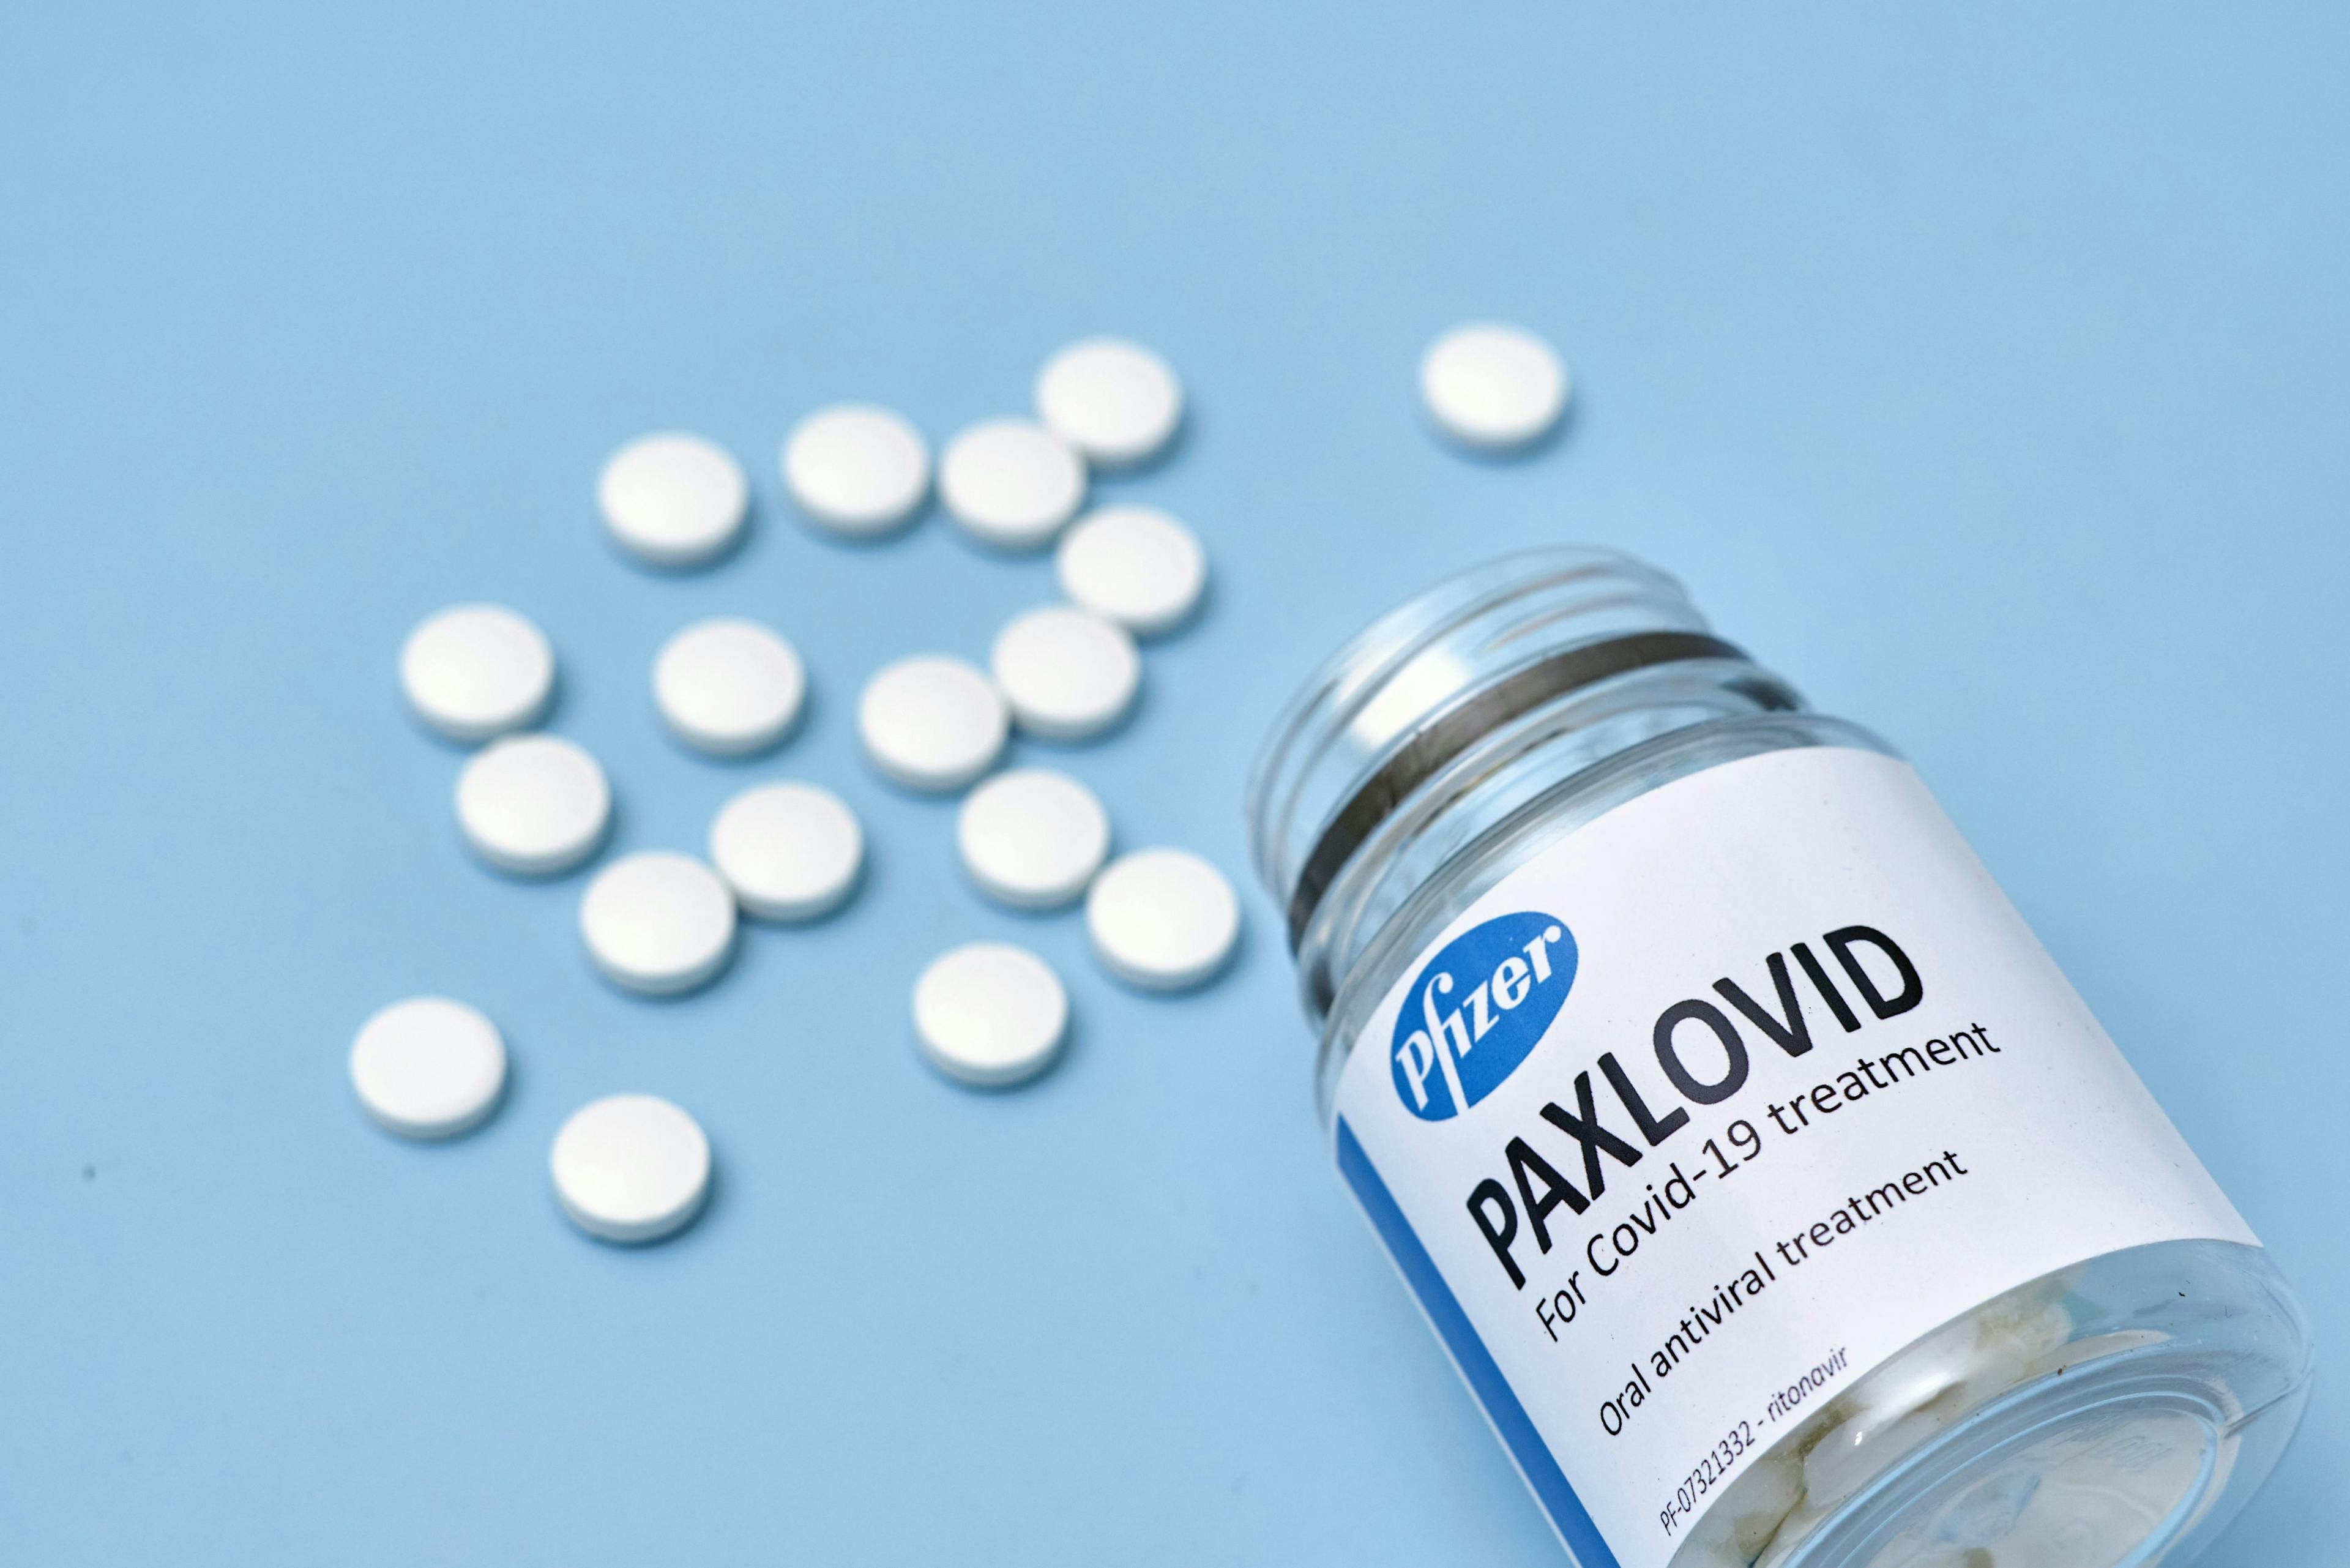 Paxlovid Significantly Reduces the Risk of COVID-19 Hospitalization and Death